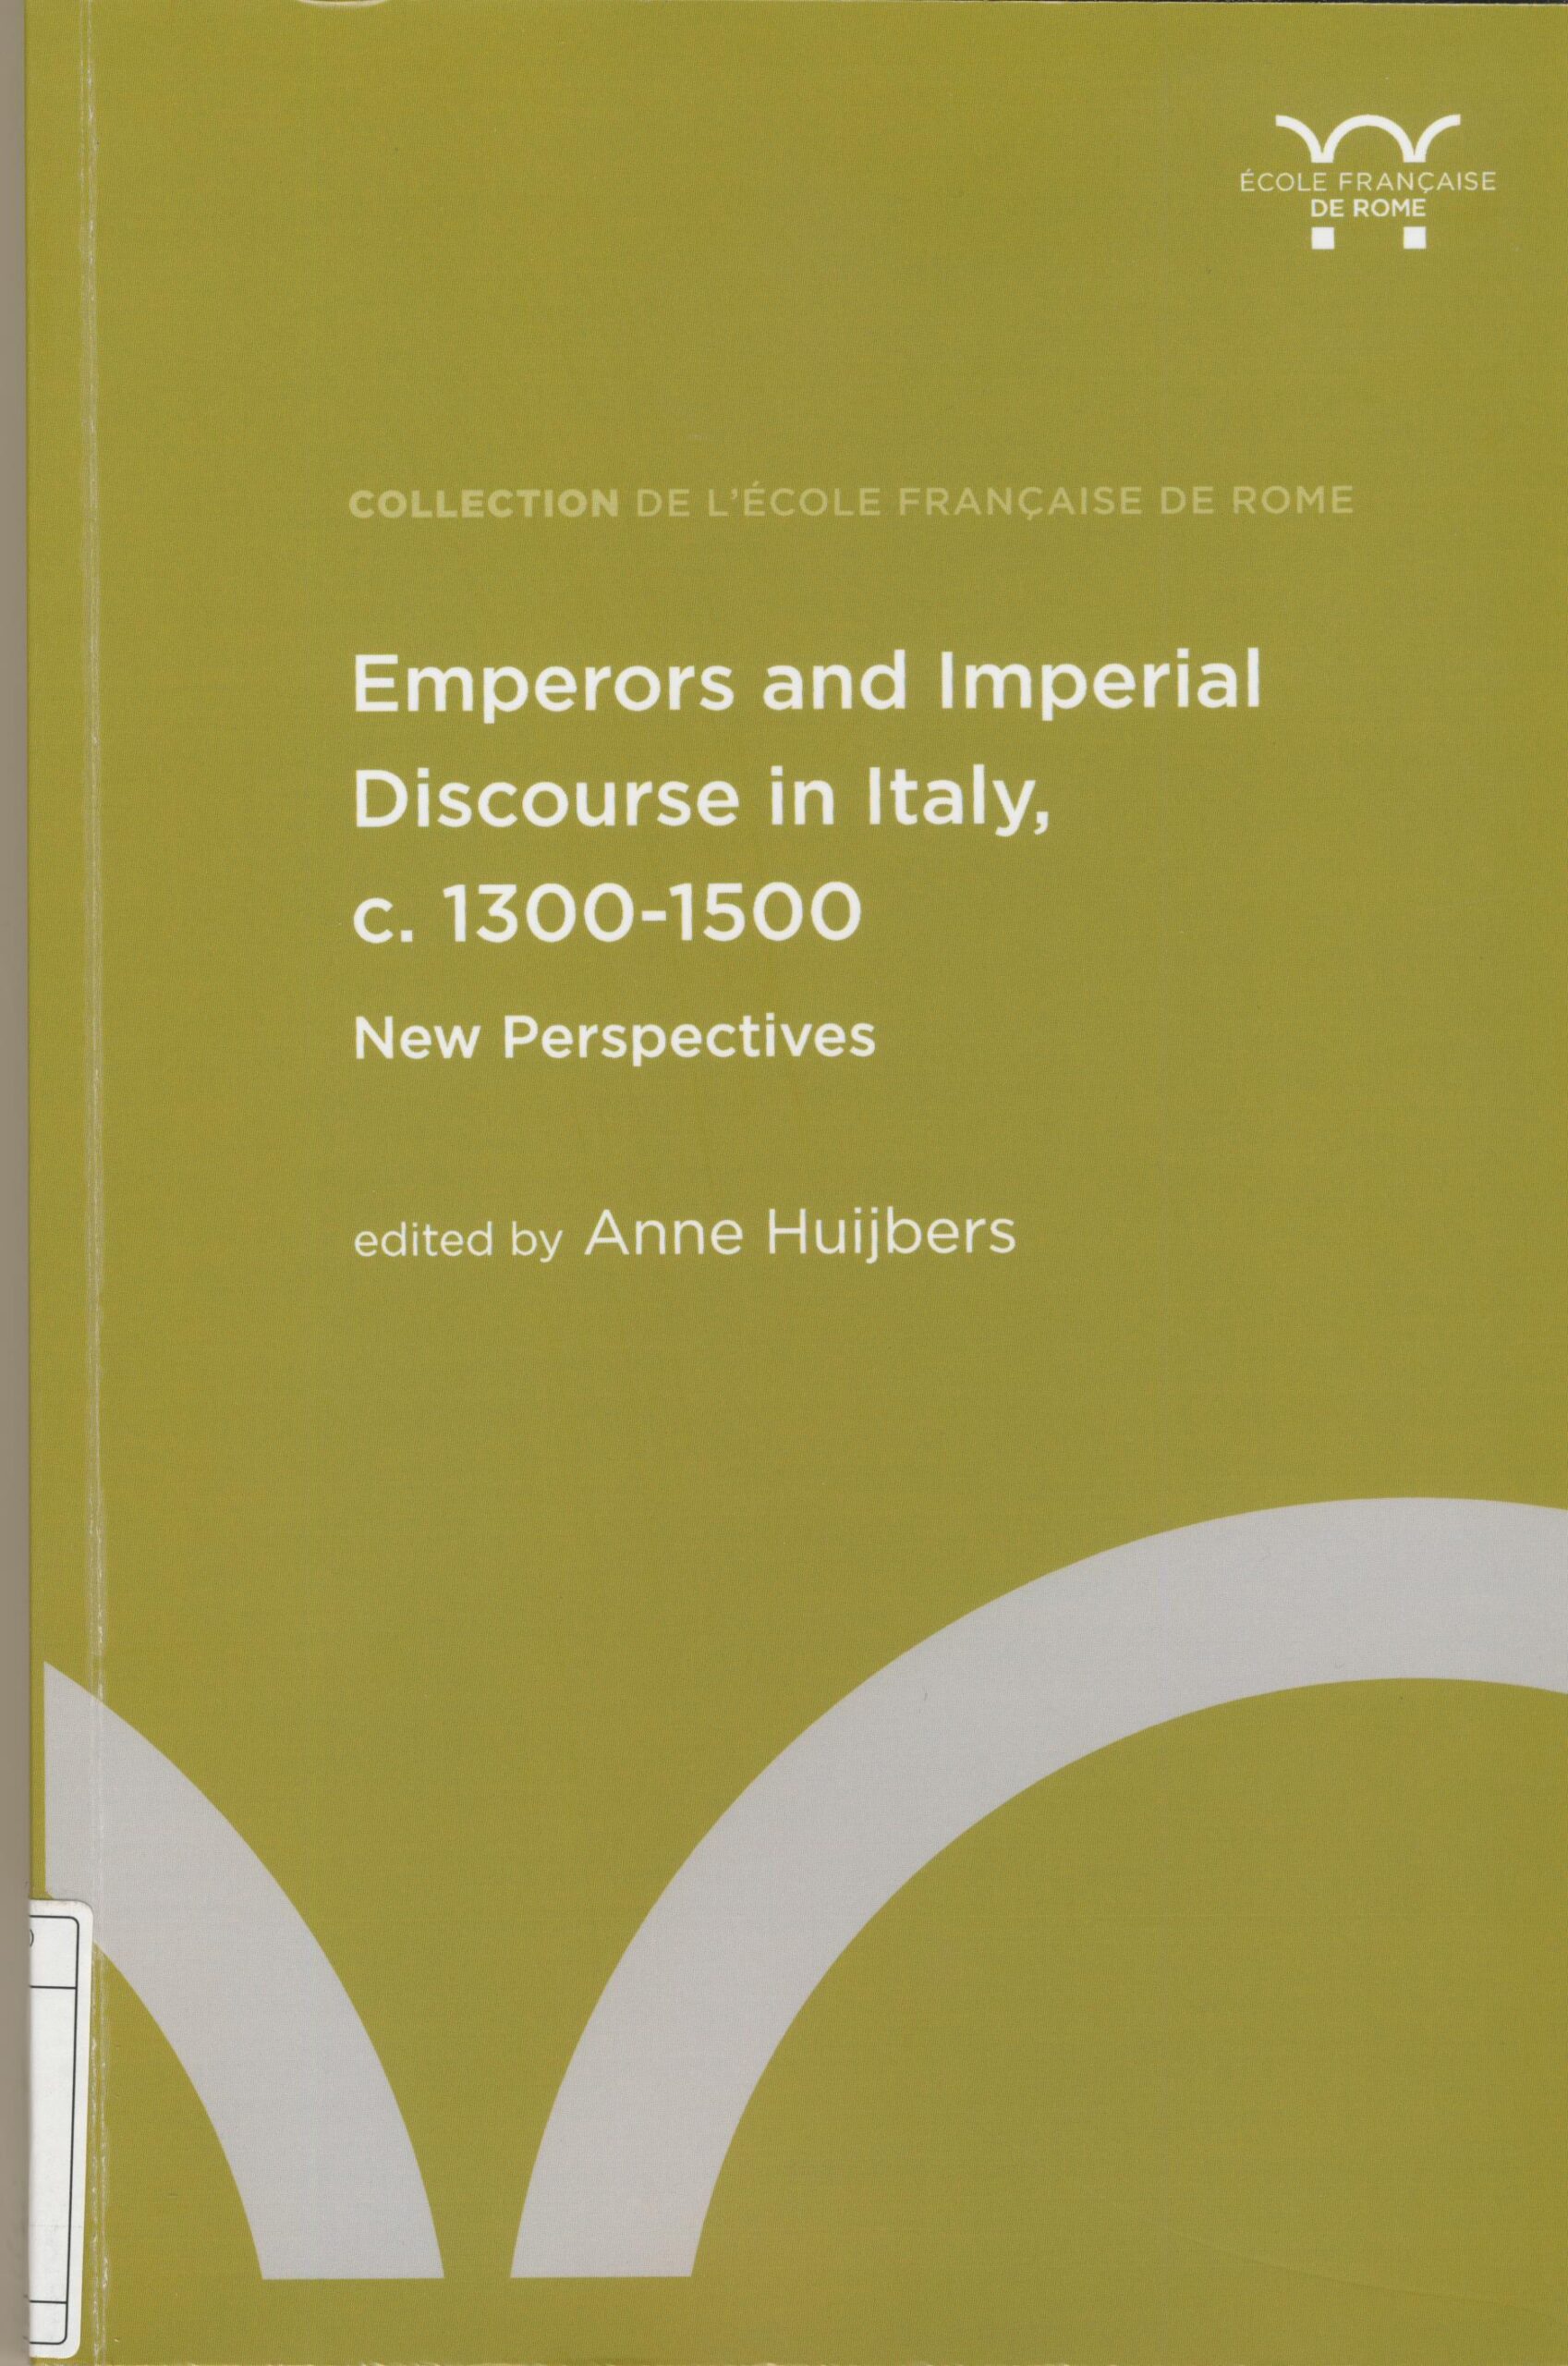 Emperors and imperial discourse in Italy